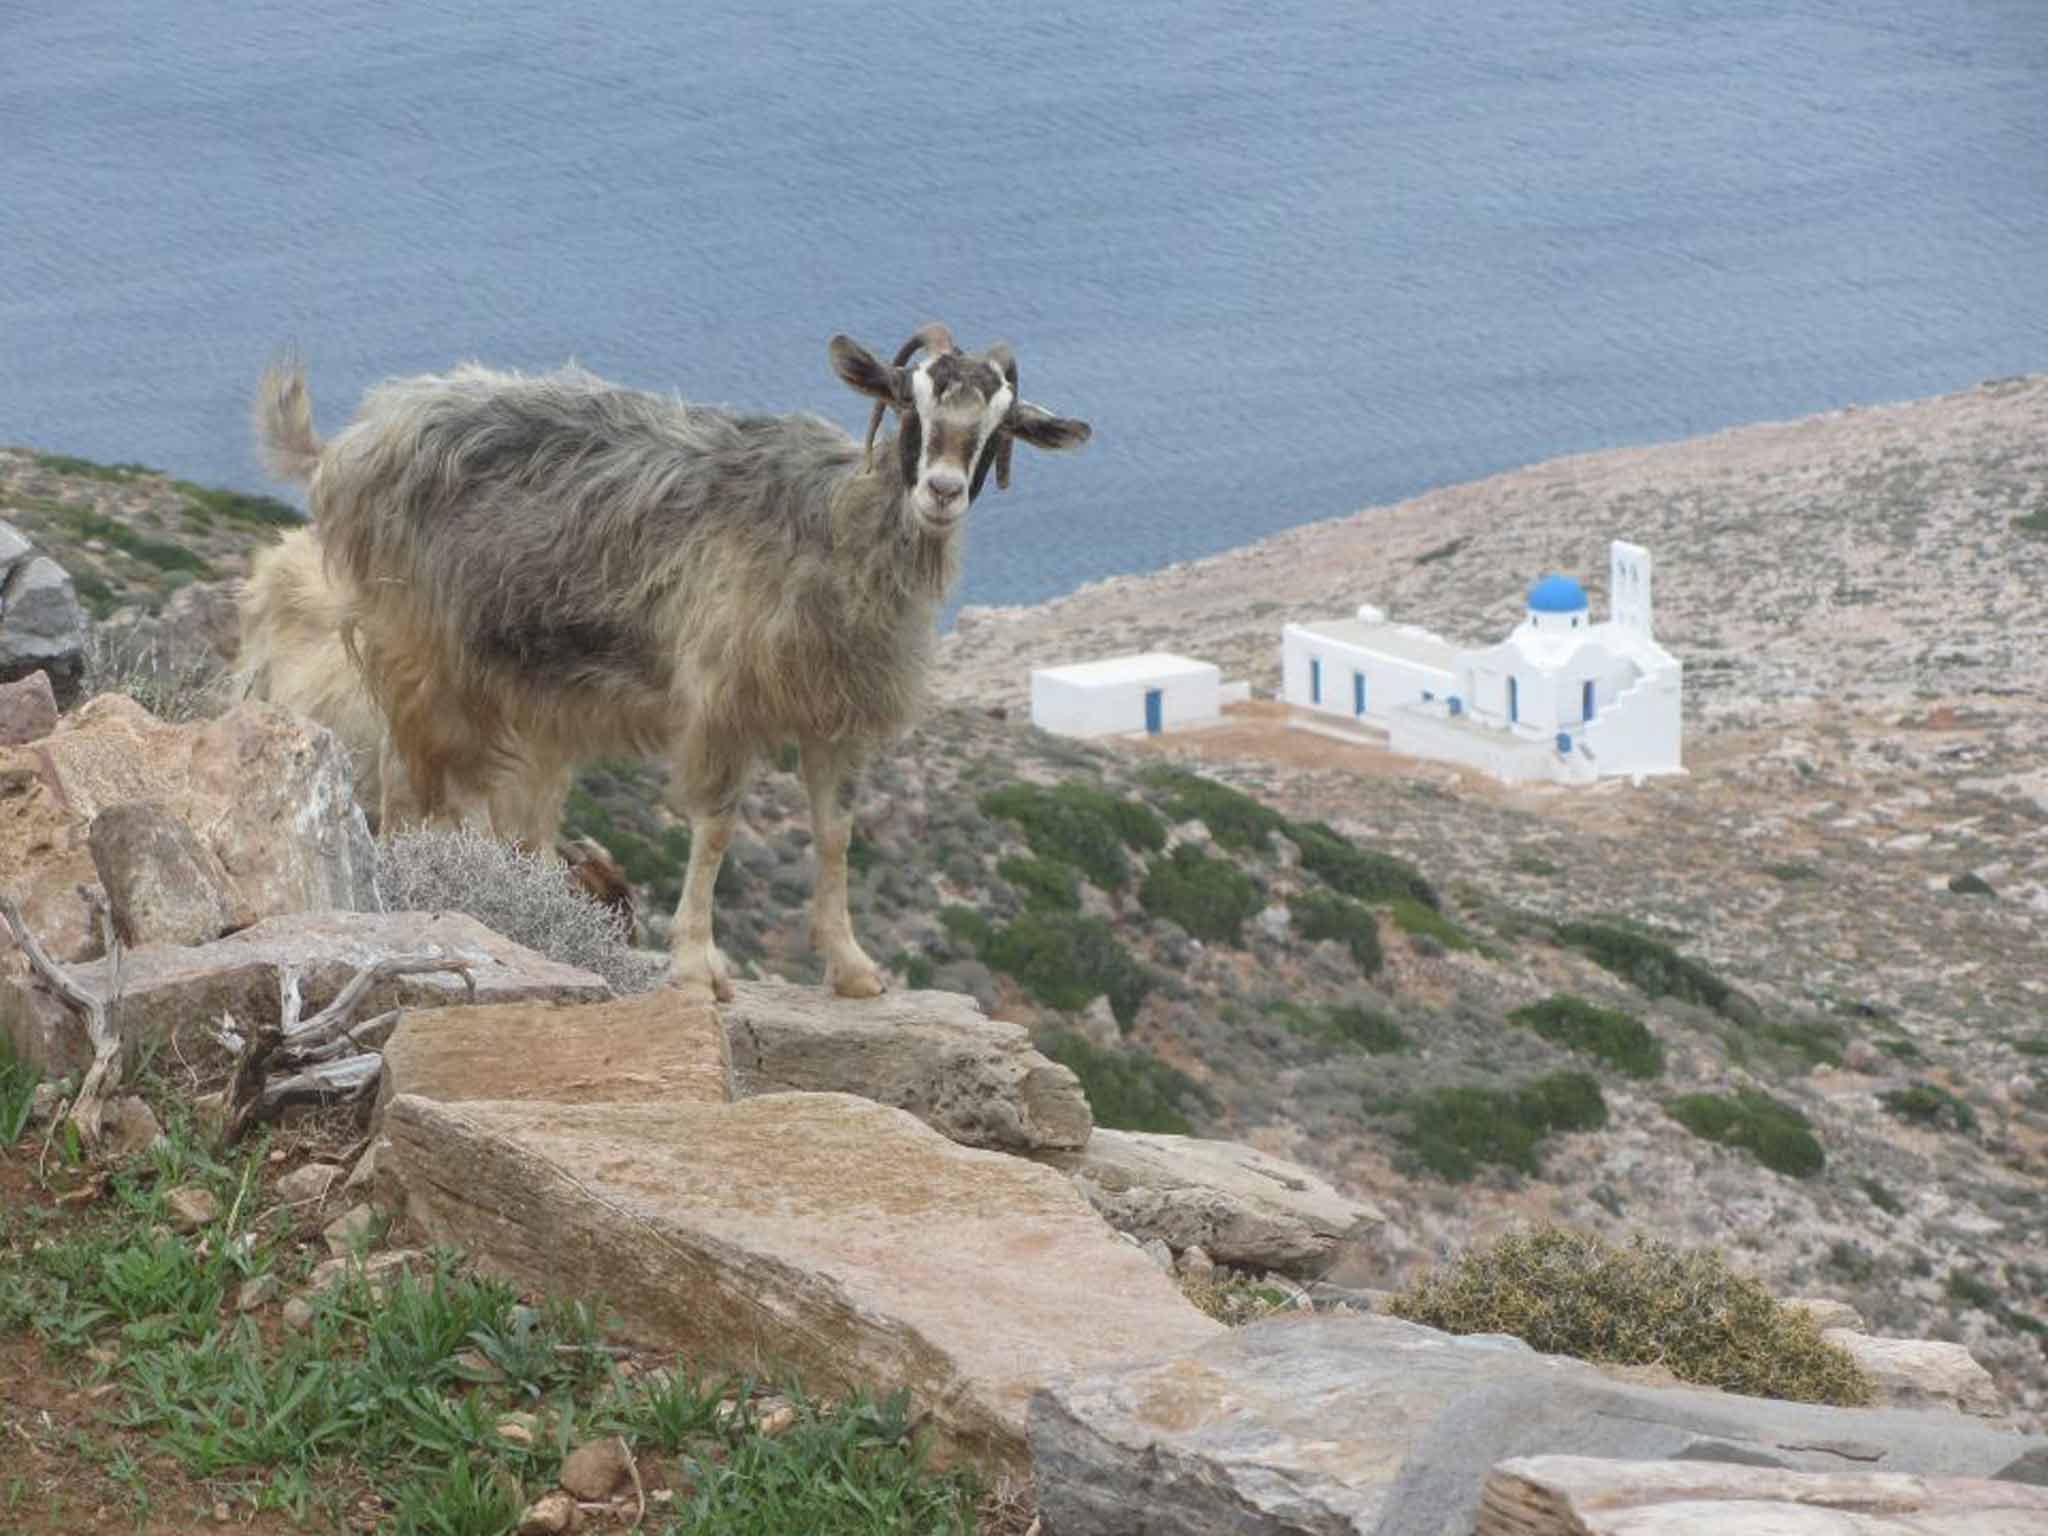 On the hoof: mountain goat, Sifnos